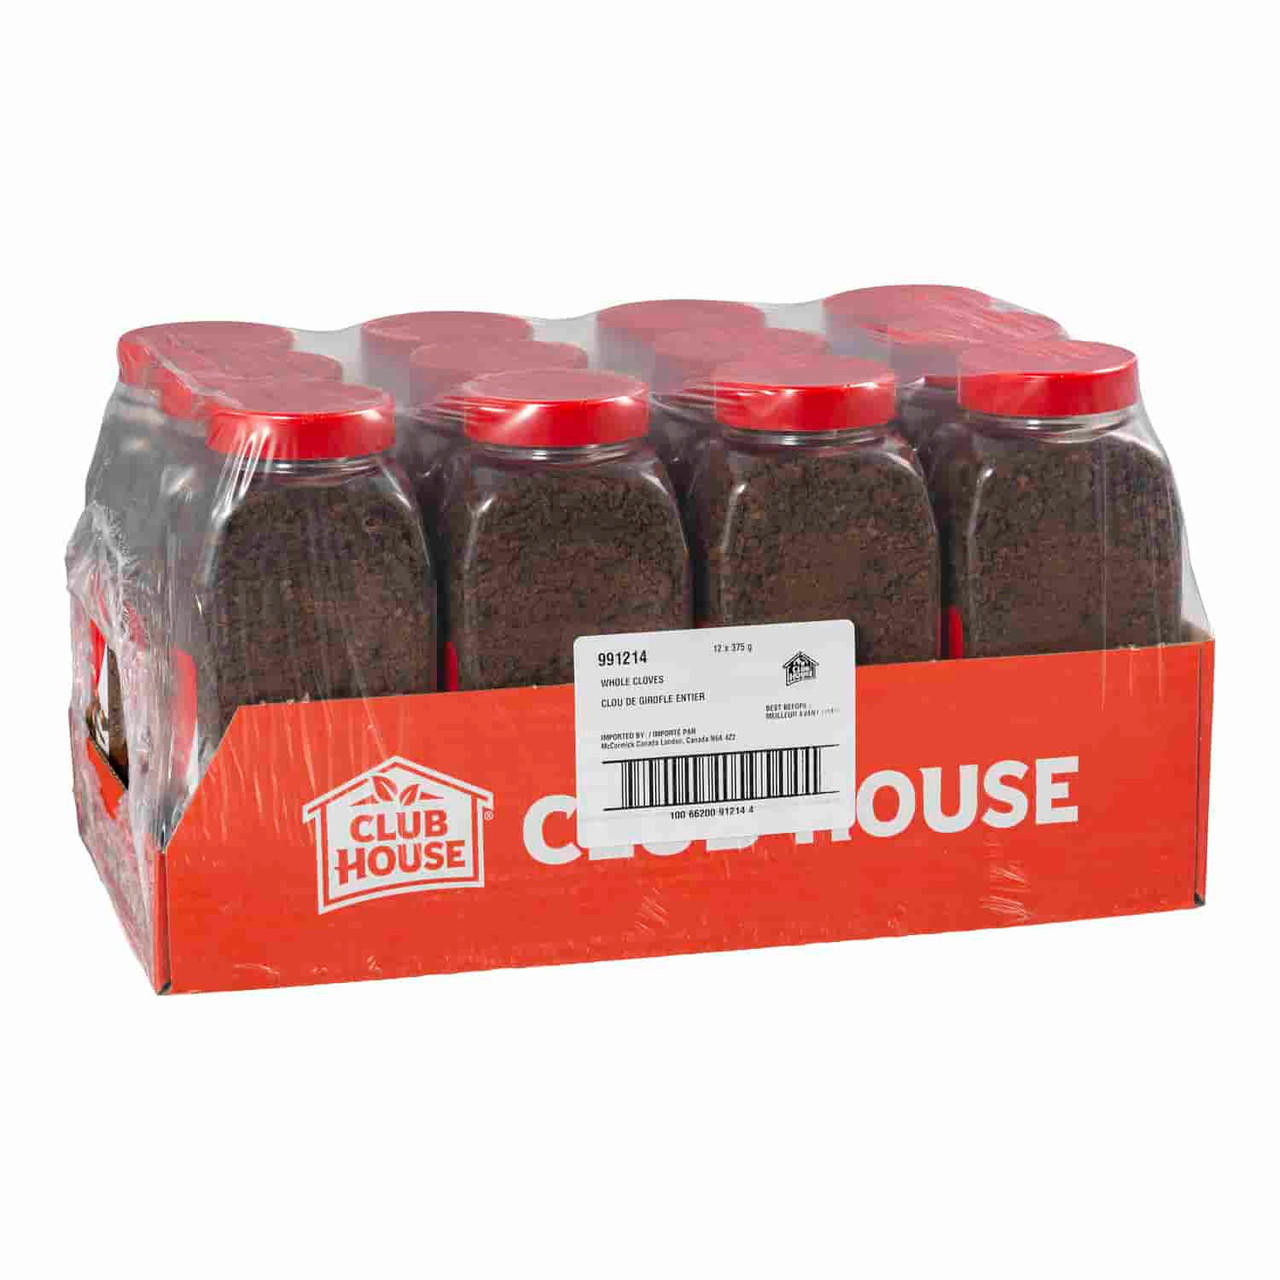 clubhouse Clubhouse Spice Clove Whole (12/Case) 